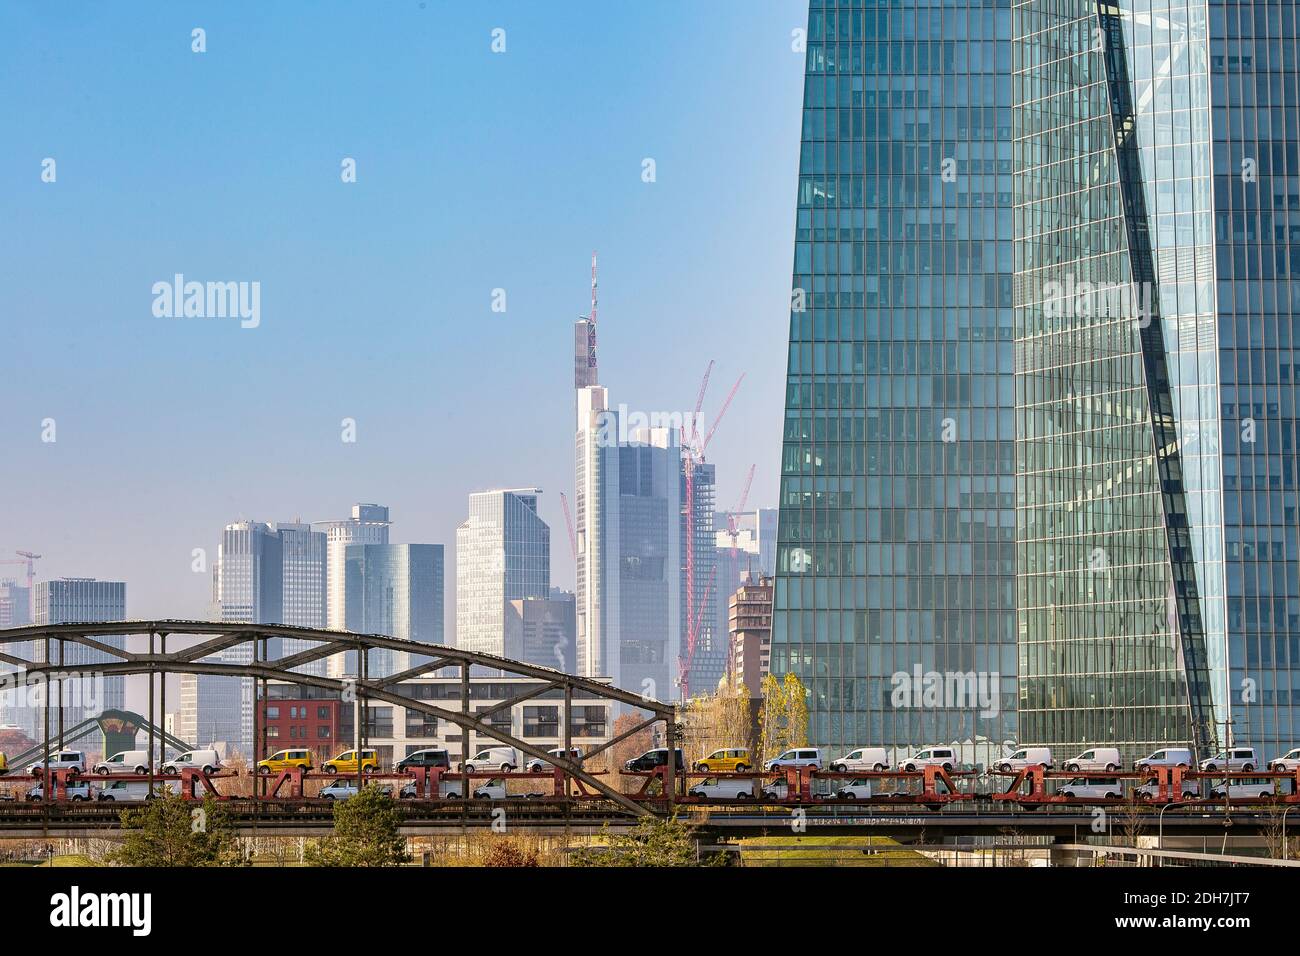 Freight train carrying many cars crossing railway bridge with the Frankfurt Skyline In the background in Frankfurt am Main, Hesse ,Germany. Stock Photo